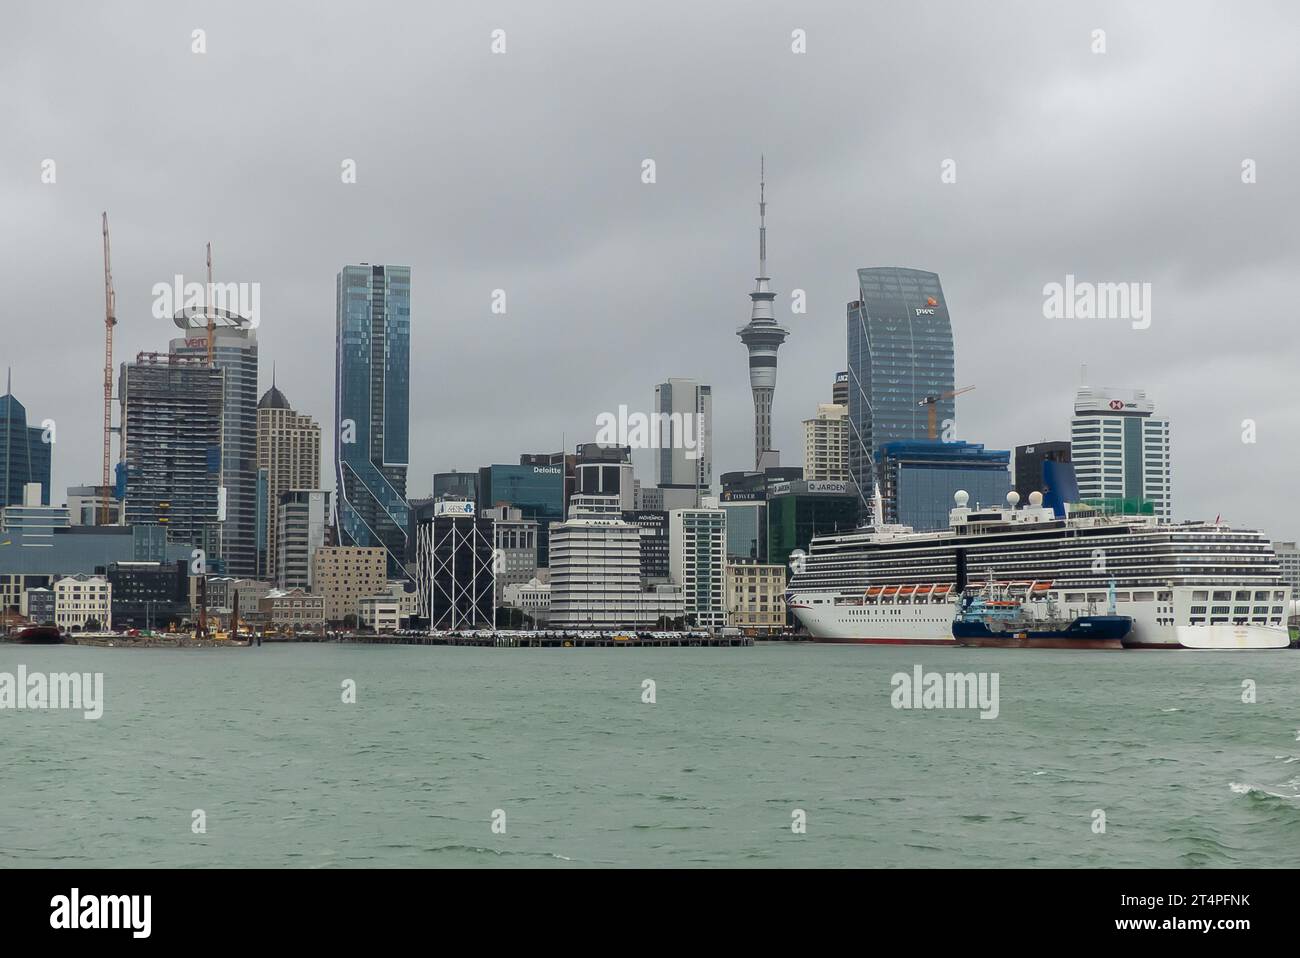 Auckland waterfront and harbour, taken from the Devonport ferry Stock Photo